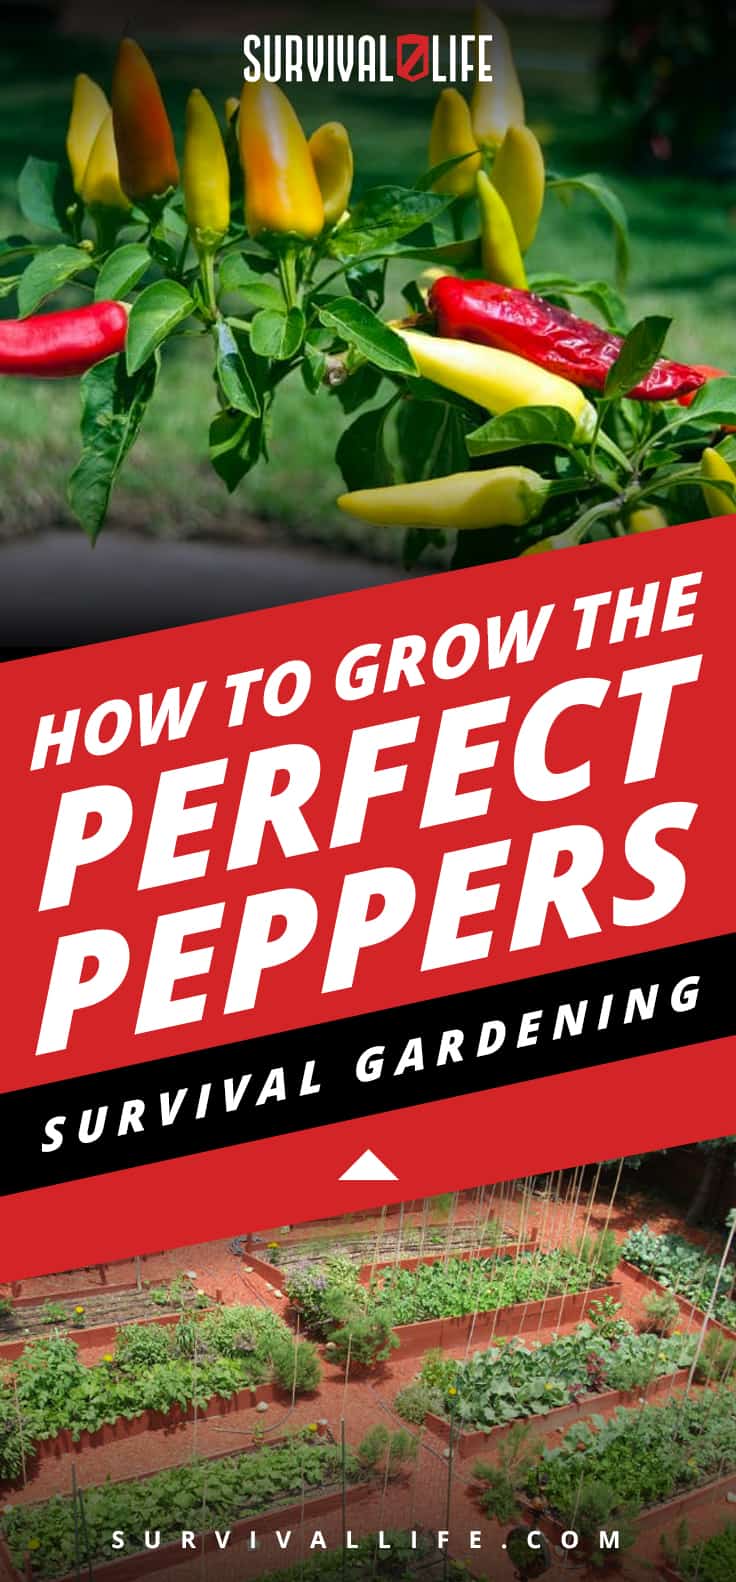 How To Grow The Perfect Peppers: Survival Gardening